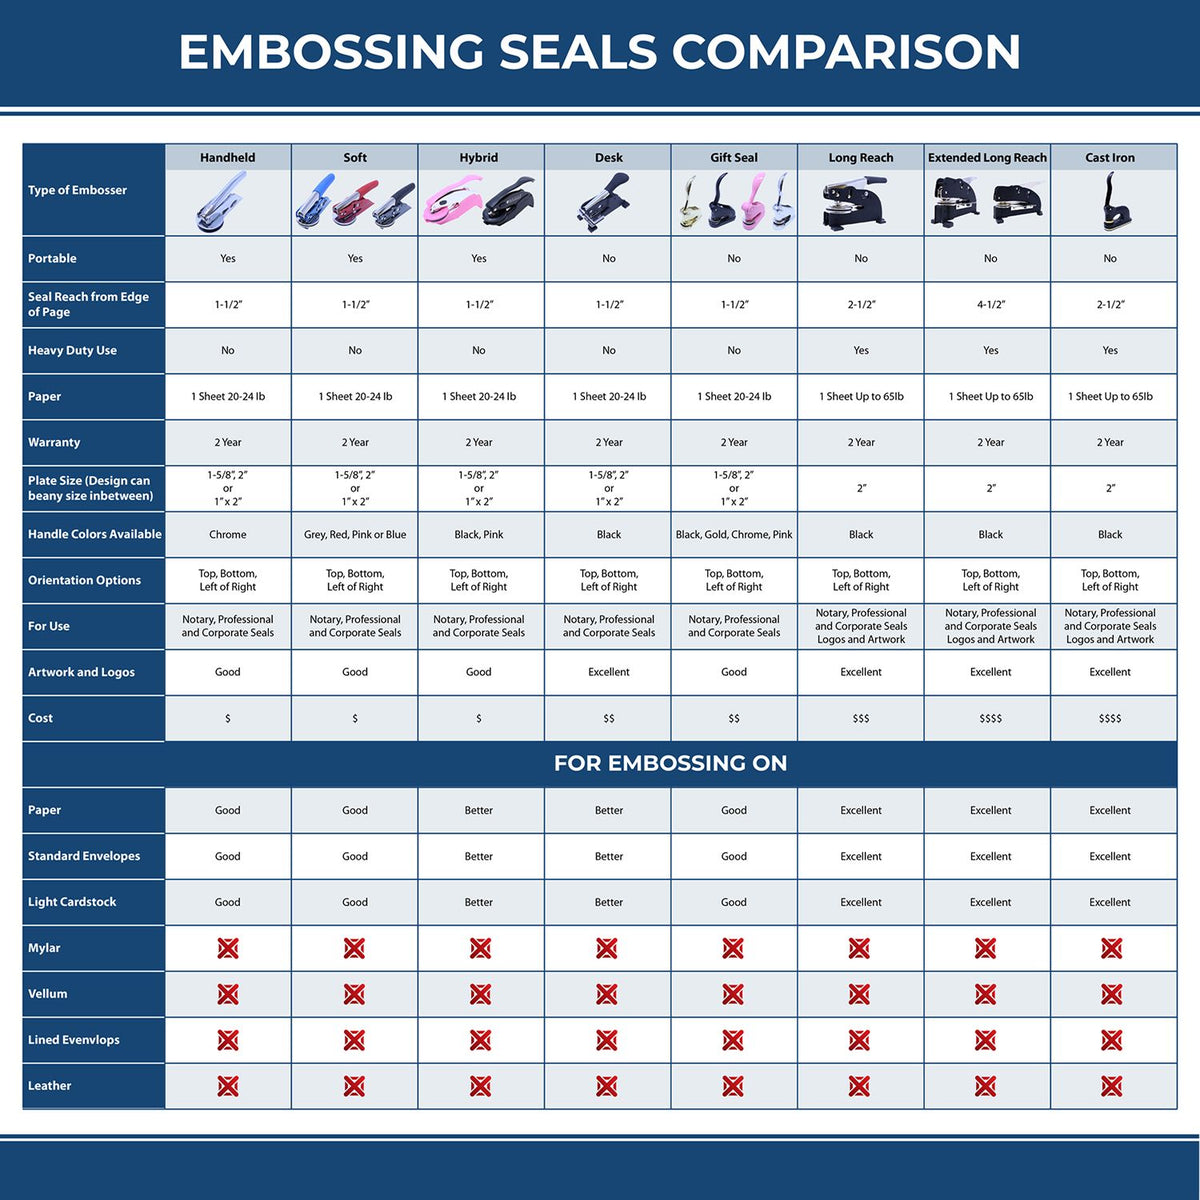 A comparison chart for the different types of mount models available for the Extended Long Reach Louisiana Architect Seal Embosser.